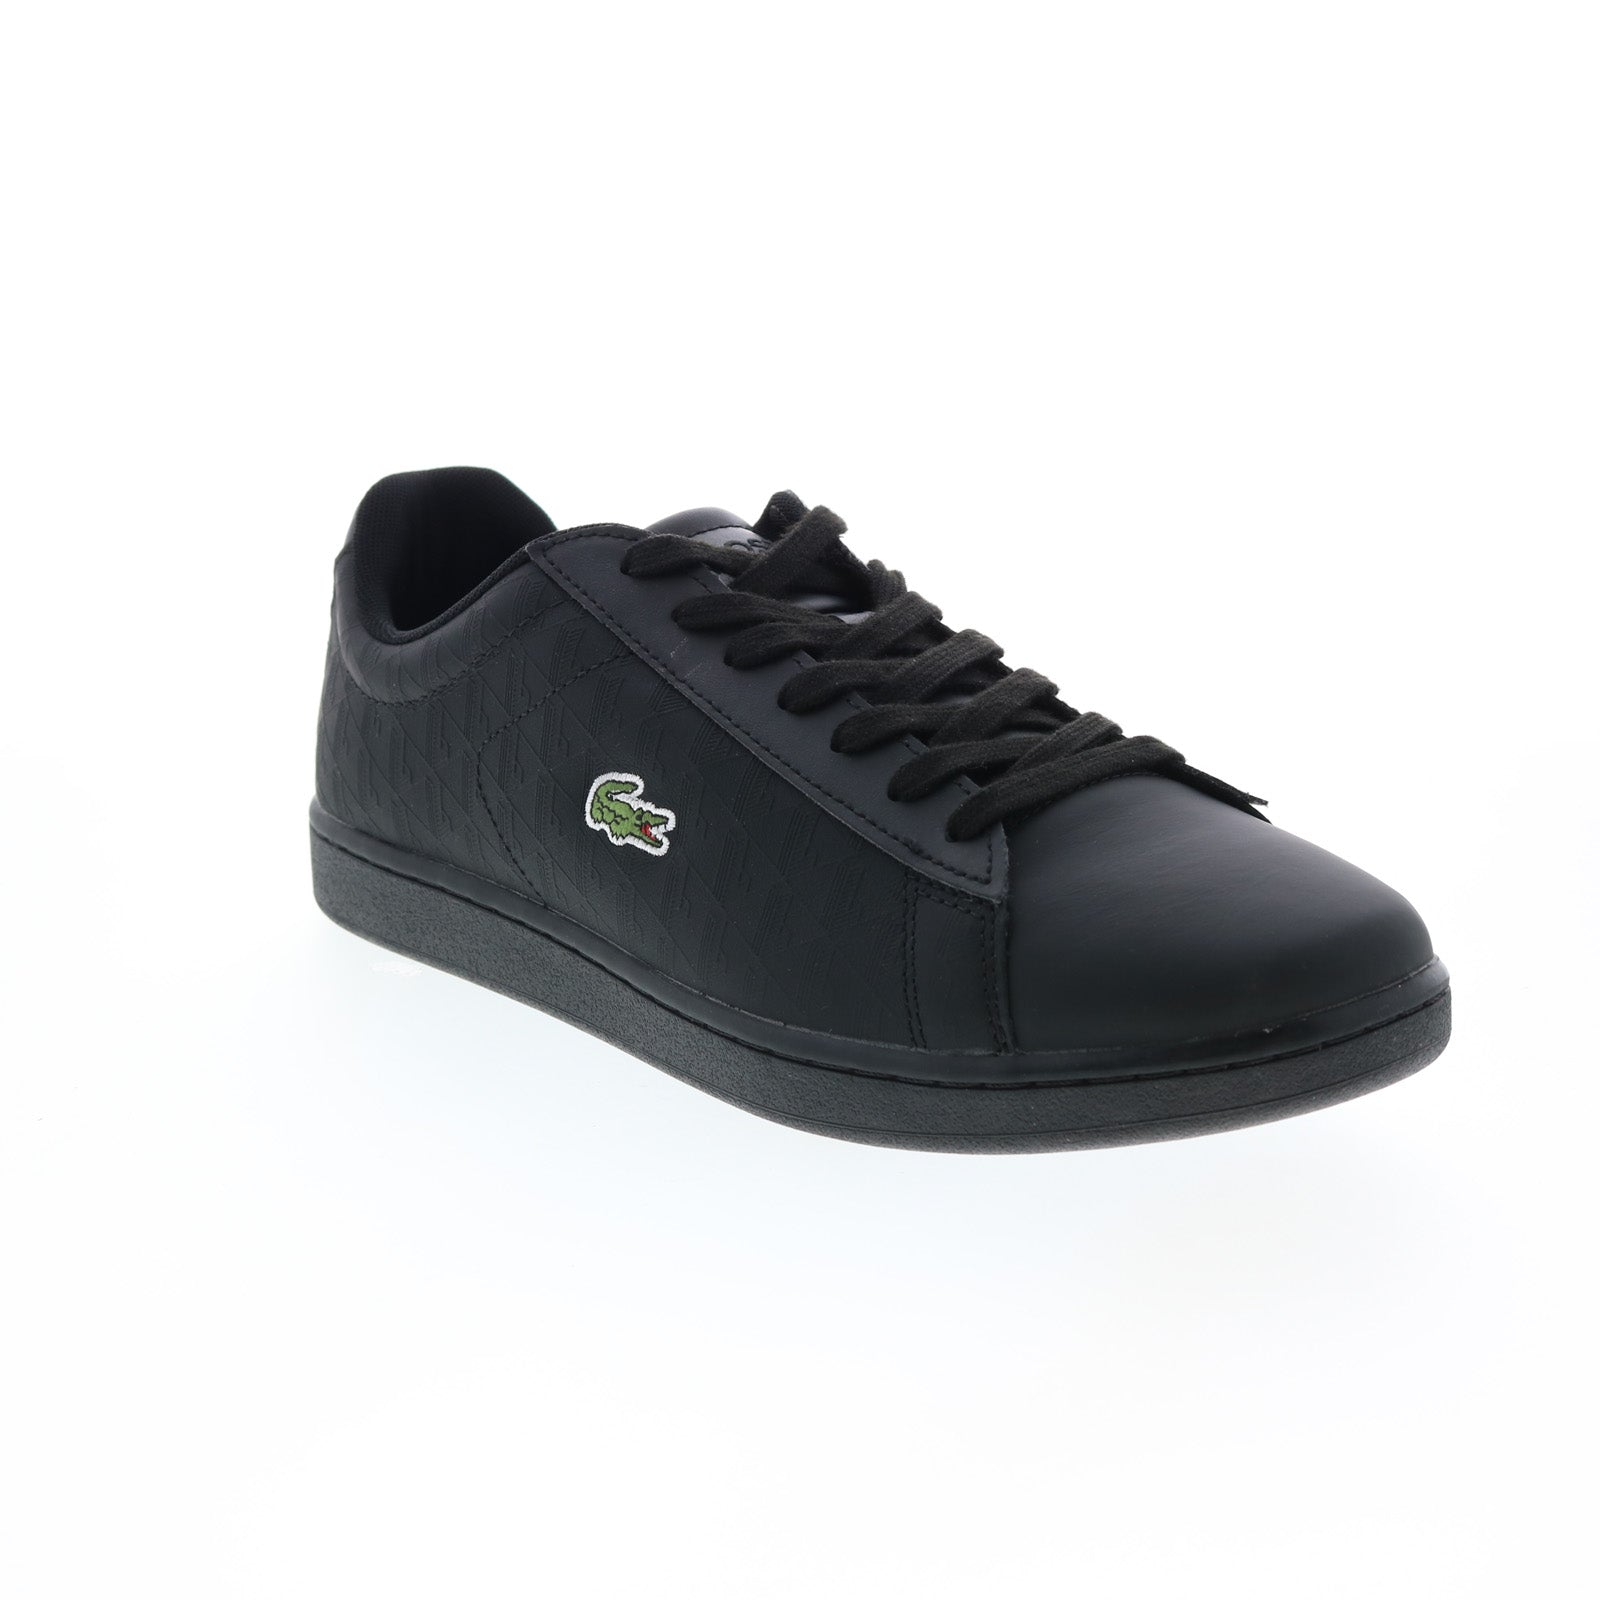 Lacoste Carnaby 222 5 Mens Black Leather Sneakers Sh Ruze Shoes